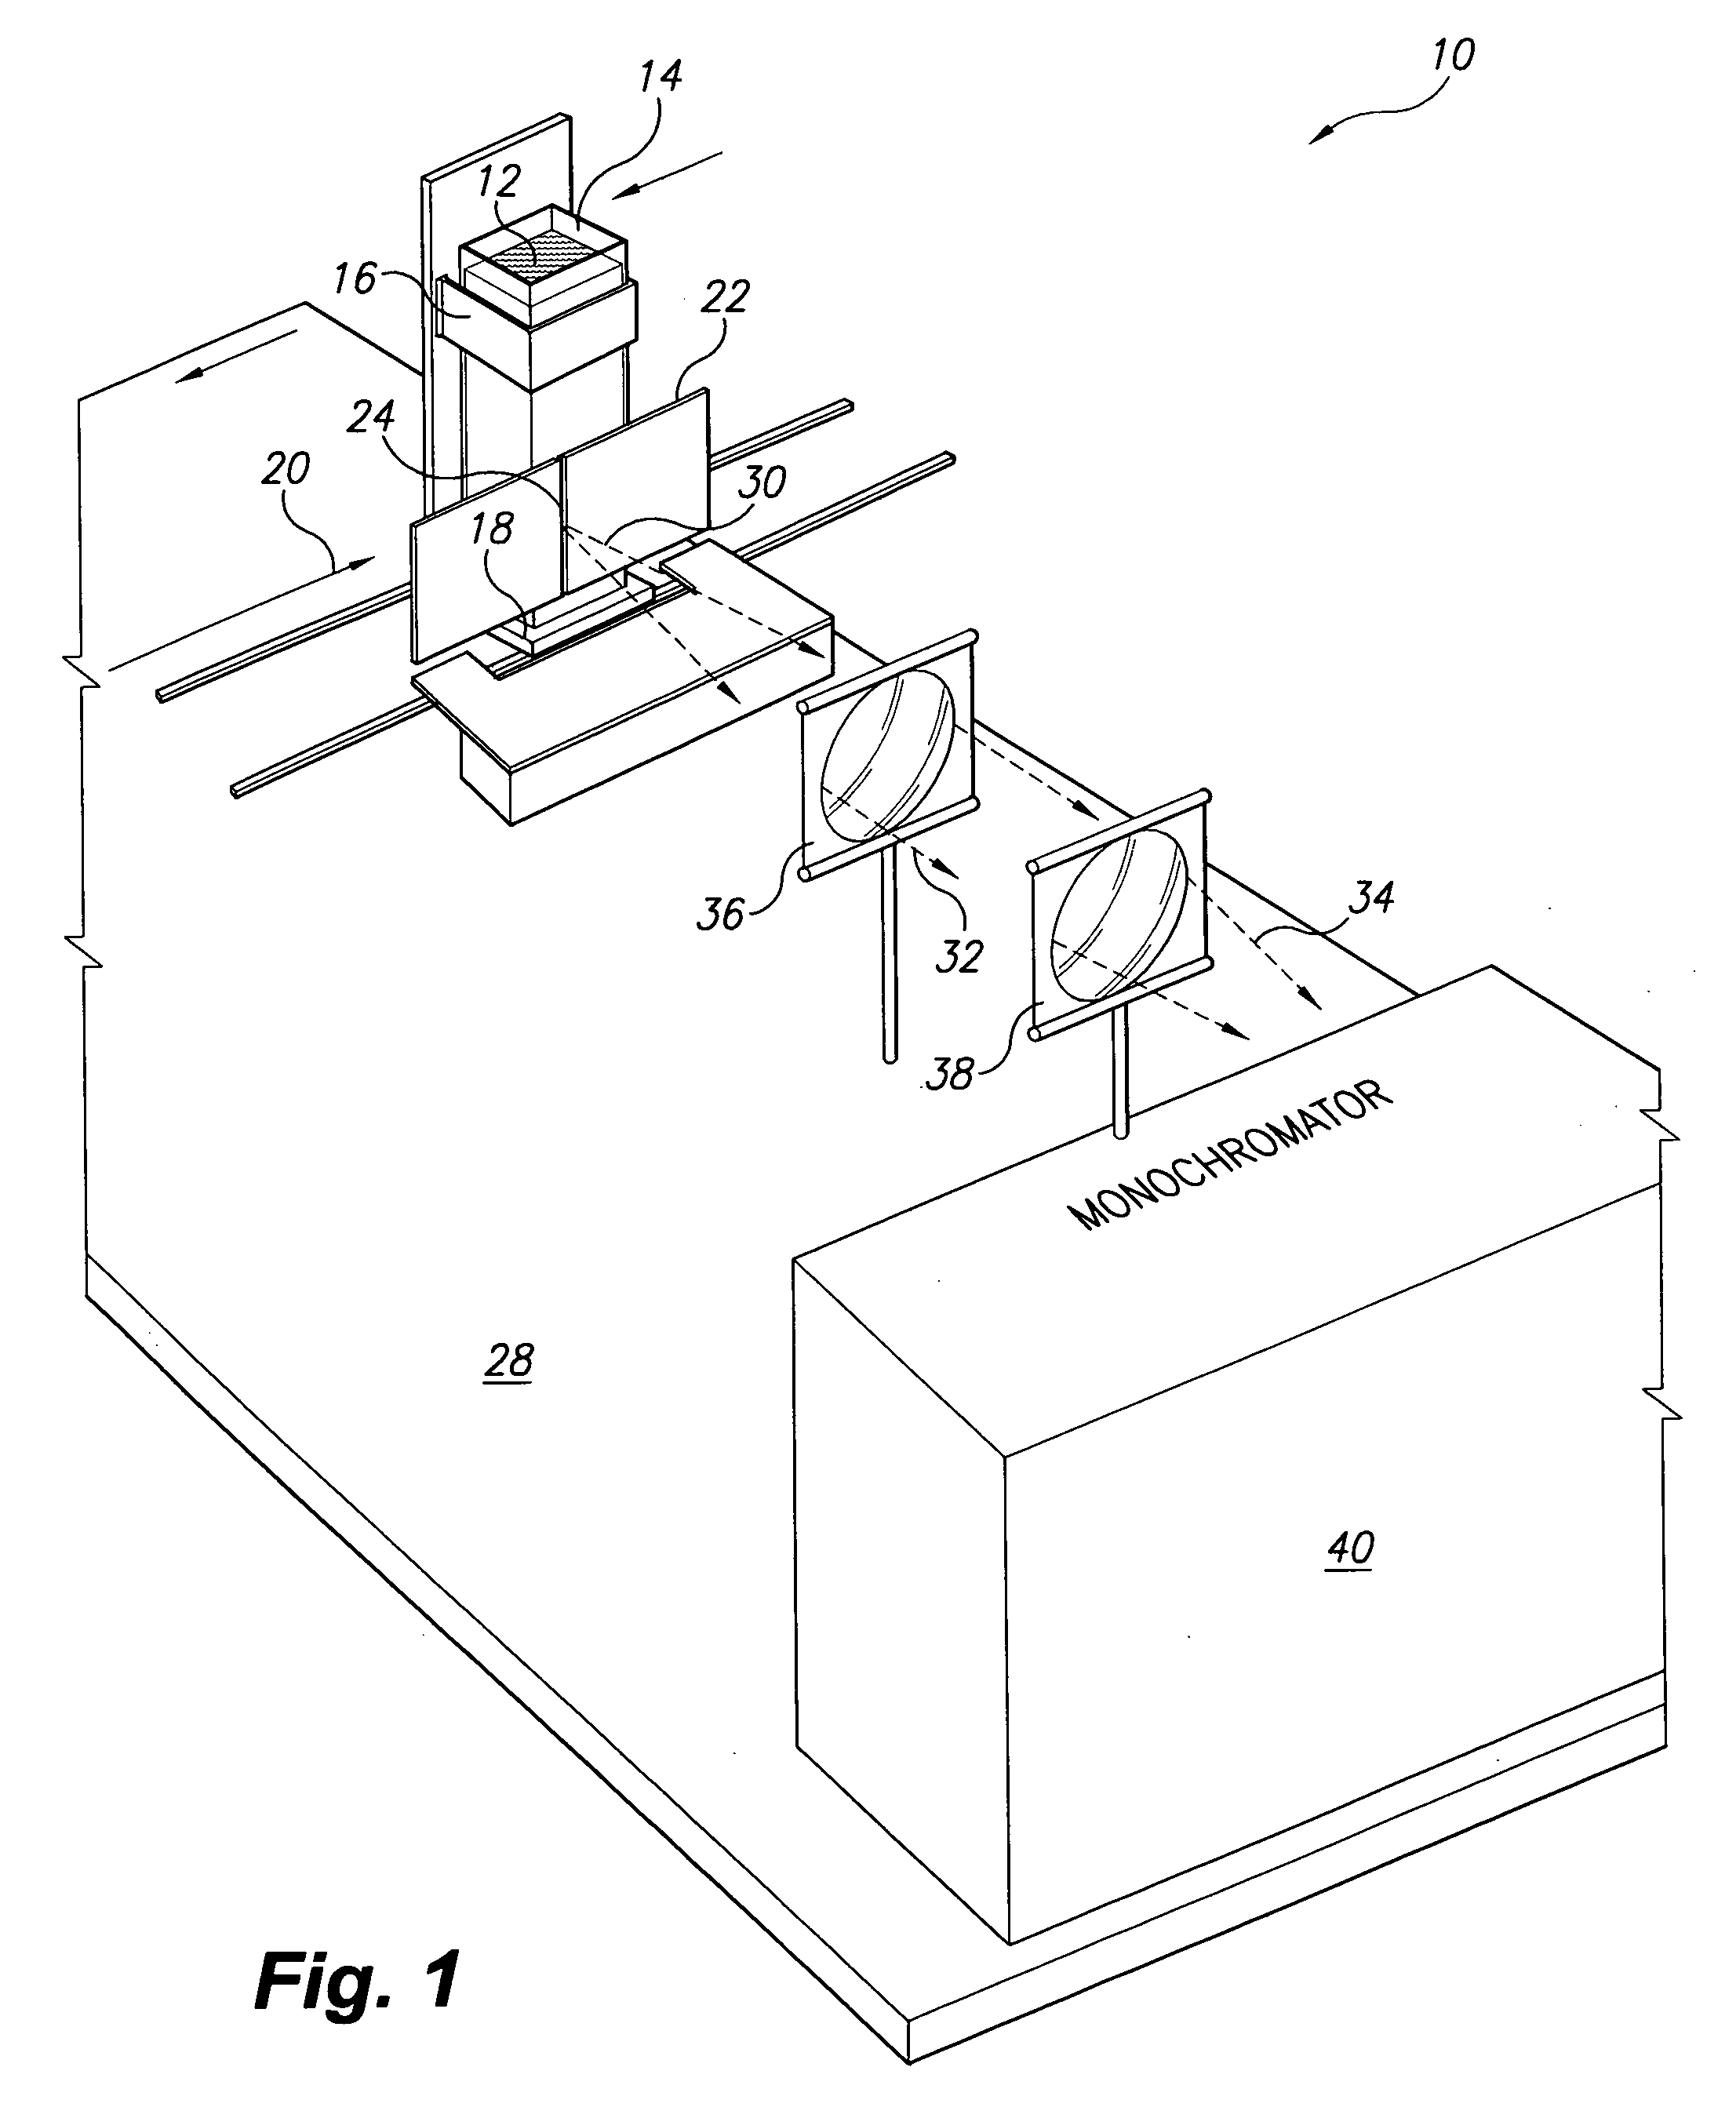 Apparatus and method for measuring concentrations of fuel mixtures using depth-resolved laser-induced fluorescence